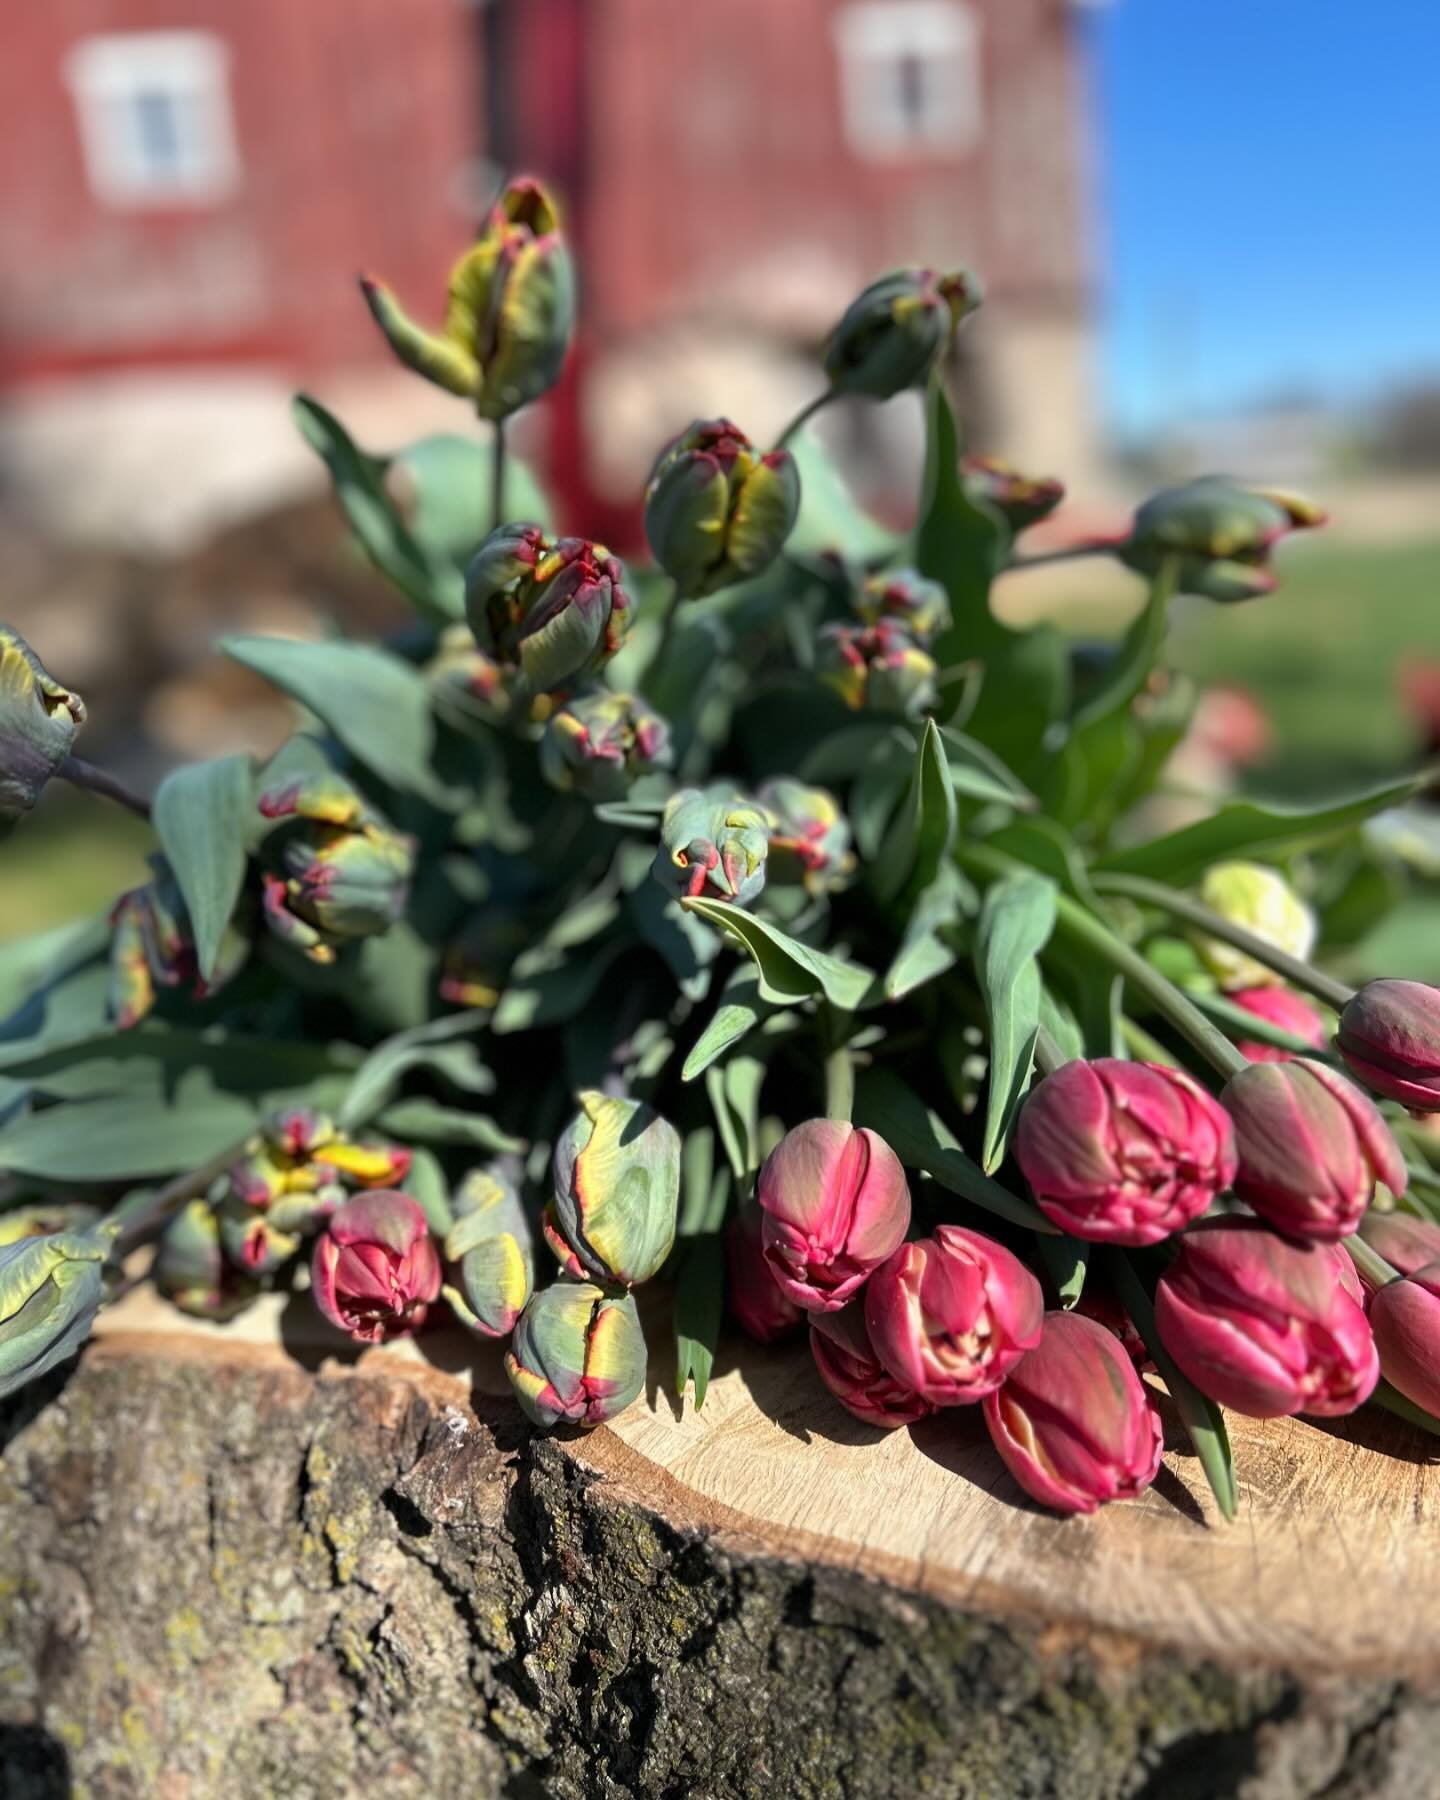 If you drove by and saw me harvesting Tulips with a kid on my back last night you got a real good glimpse at everyday life around here.

Working from home with little kids is no joke but the reward is a beautiful thing. 

The Tulips and those kids ar